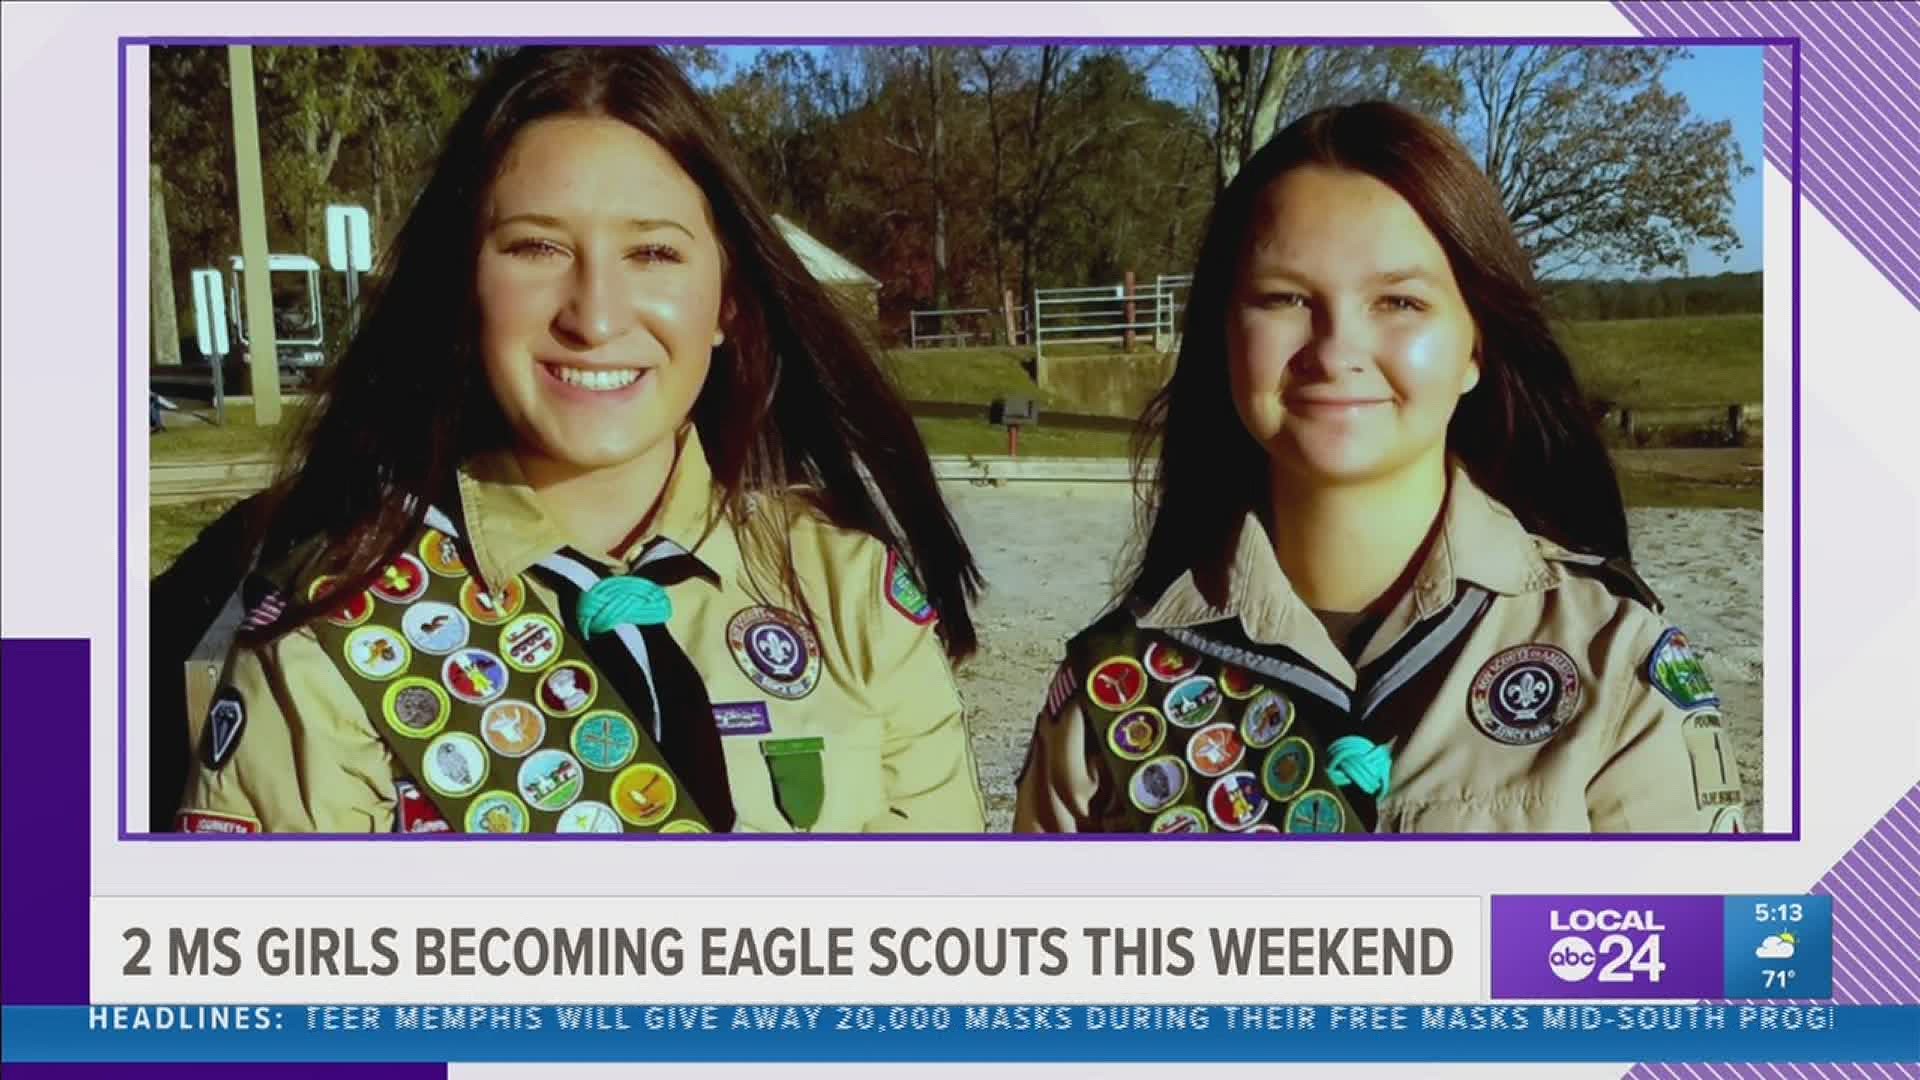 The two Lewisburg High School students will become Eagle Scouts this weekend, which is the highest rank that can be attained in the Boy Scouts program.